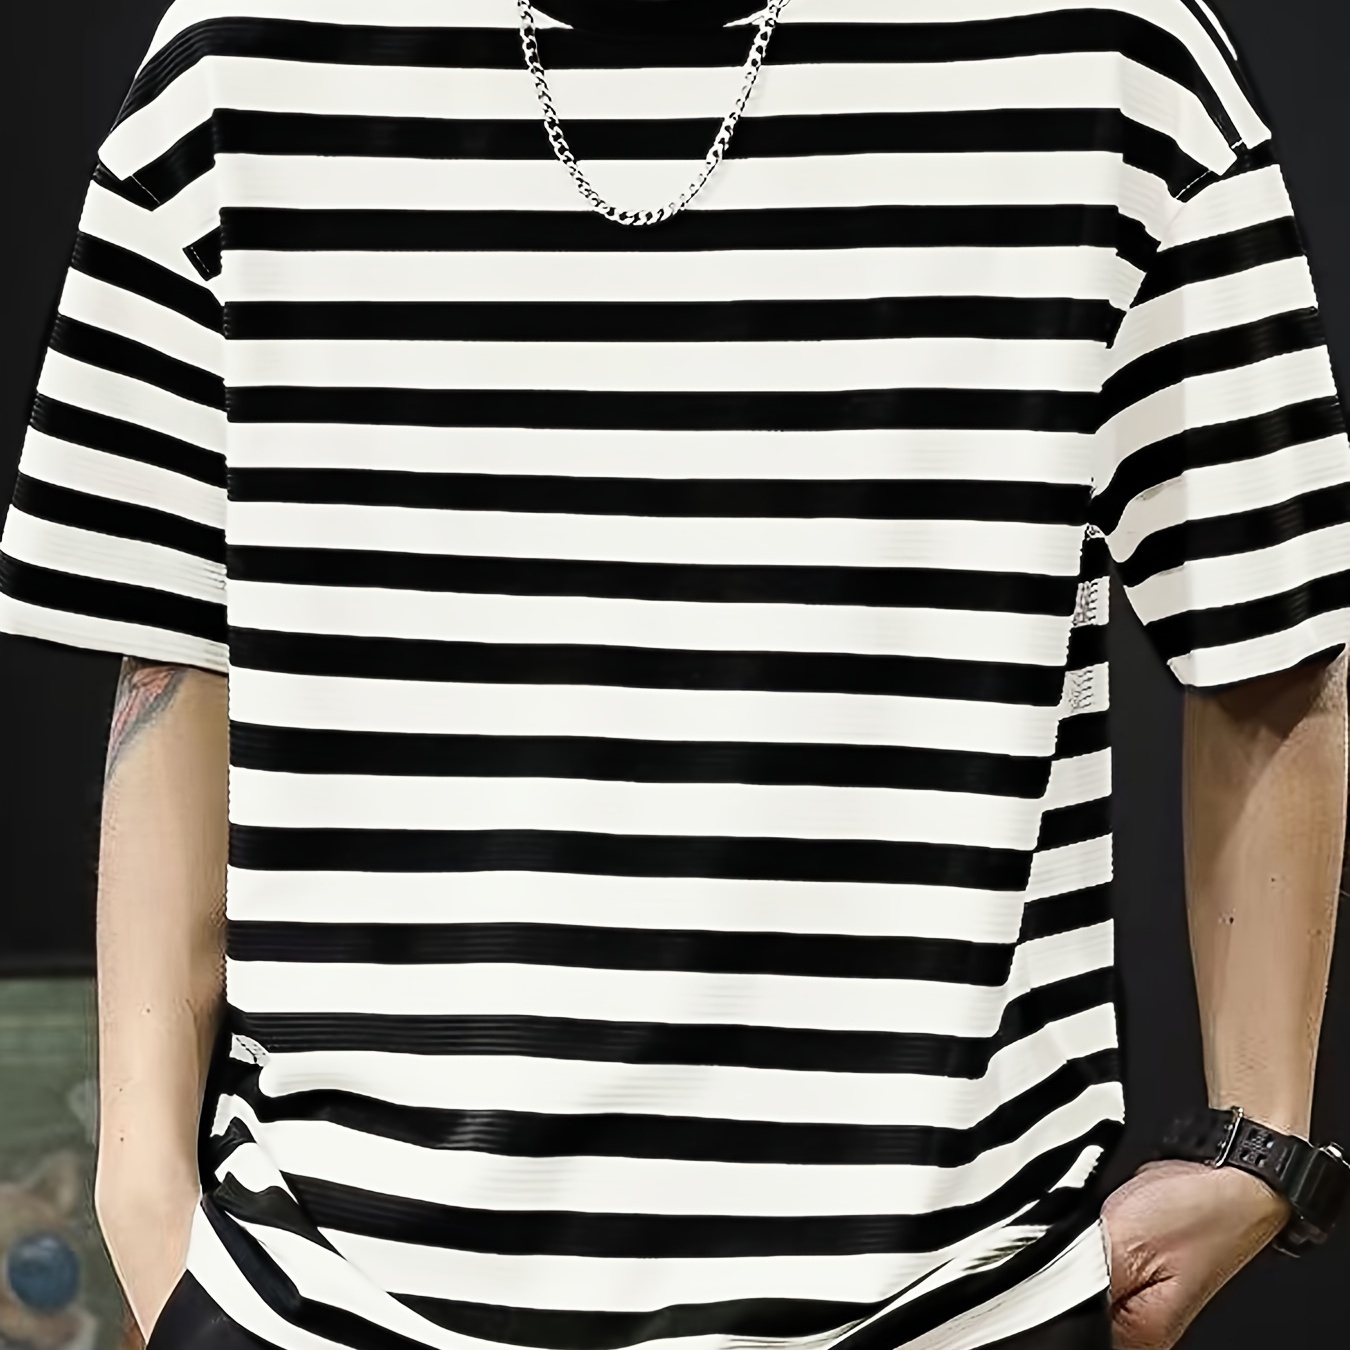 

Men's Striped T-shirt, Casual Short Sleeve Crew Neck Tee, Men's Clothing For Summer Outdoor